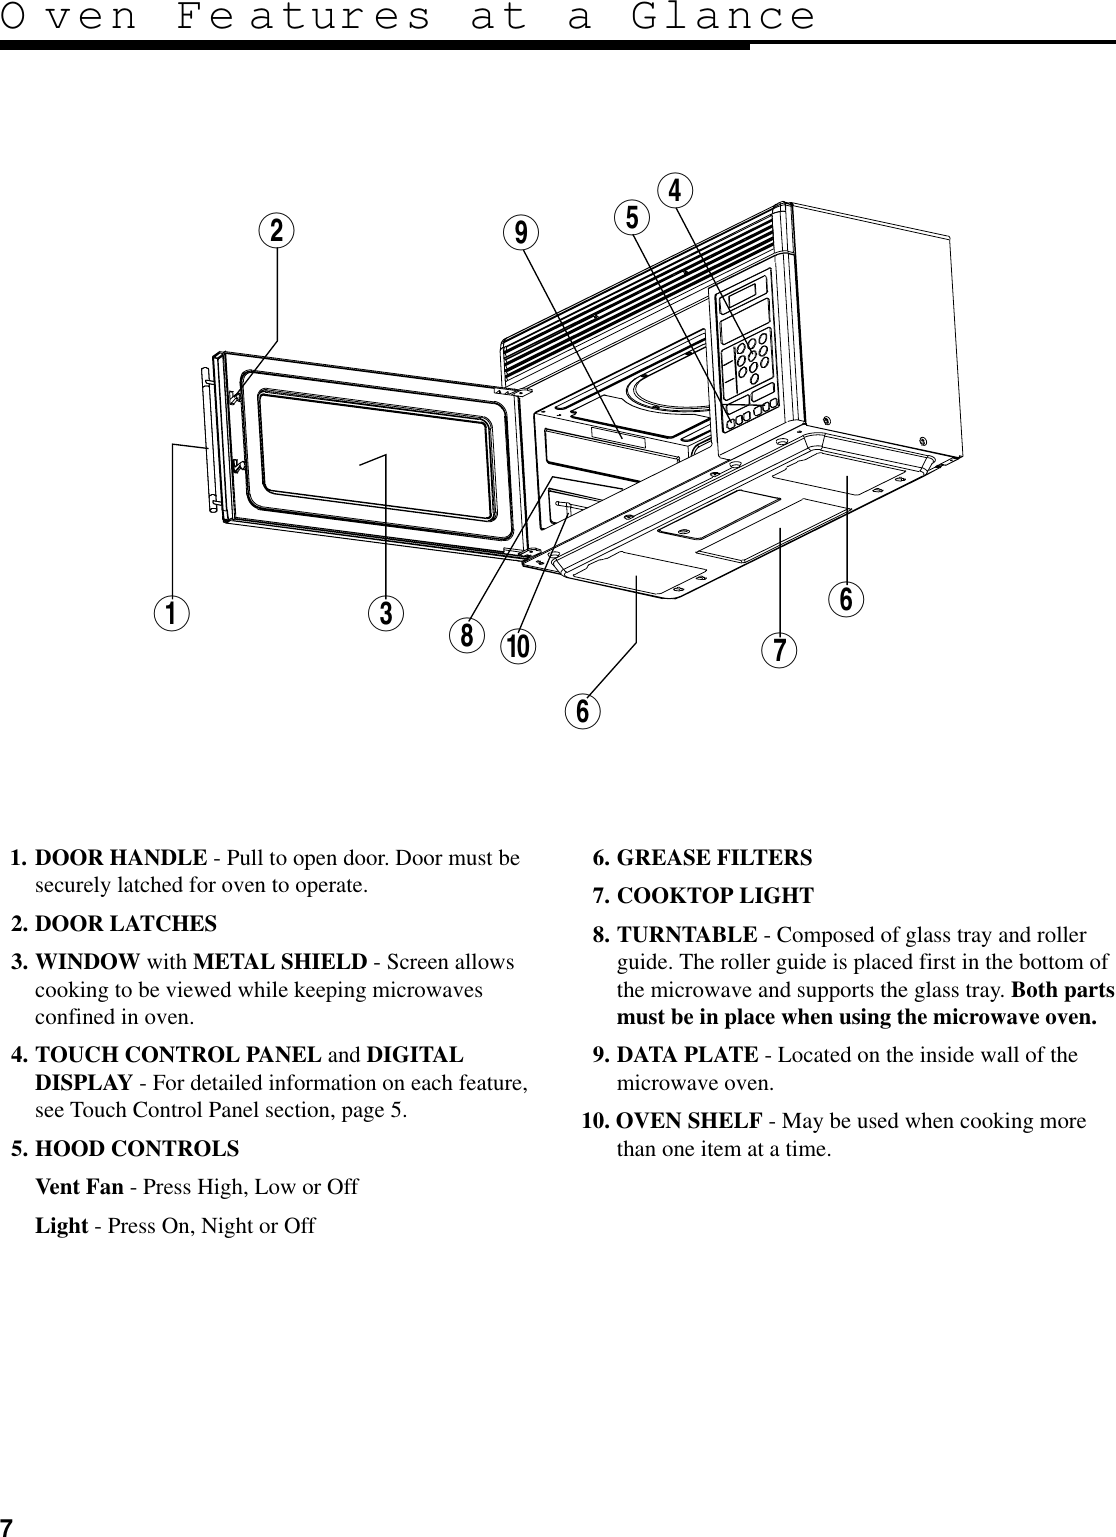 7O ven Fe atures at a Glance2954676083111. DOOR HANDLE - Pull to open door. Door must besecurely latched for oven to operate.12. DOOR LATCHES13. WINDOW with METAL SHIELD - Screen allowscooking to be viewed while keeping microwavesconfined in oven.14. TOUCH CONTROL PANEL and DIGITALDISPLAY - For detailed information on each feature,see Touch Control Panel section, page 5.15. HOOD CONTROLSVent Fan - Press High, Low or OffLight - Press On, Night or Off16. GREASE FILTERS17. COOKTOP LIGHT18. TURNTABLE - Composed of glass tray and rollerguide. The roller guide is placed first in the bottom ofthe microwave and supports the glass tray. Both partsmust be in place when using the microwave oven.19. DATA PLATE - Located on the inside wall of themicrowave oven.10. OVEN SHELF - May be used when cooking morethan one item at a time.